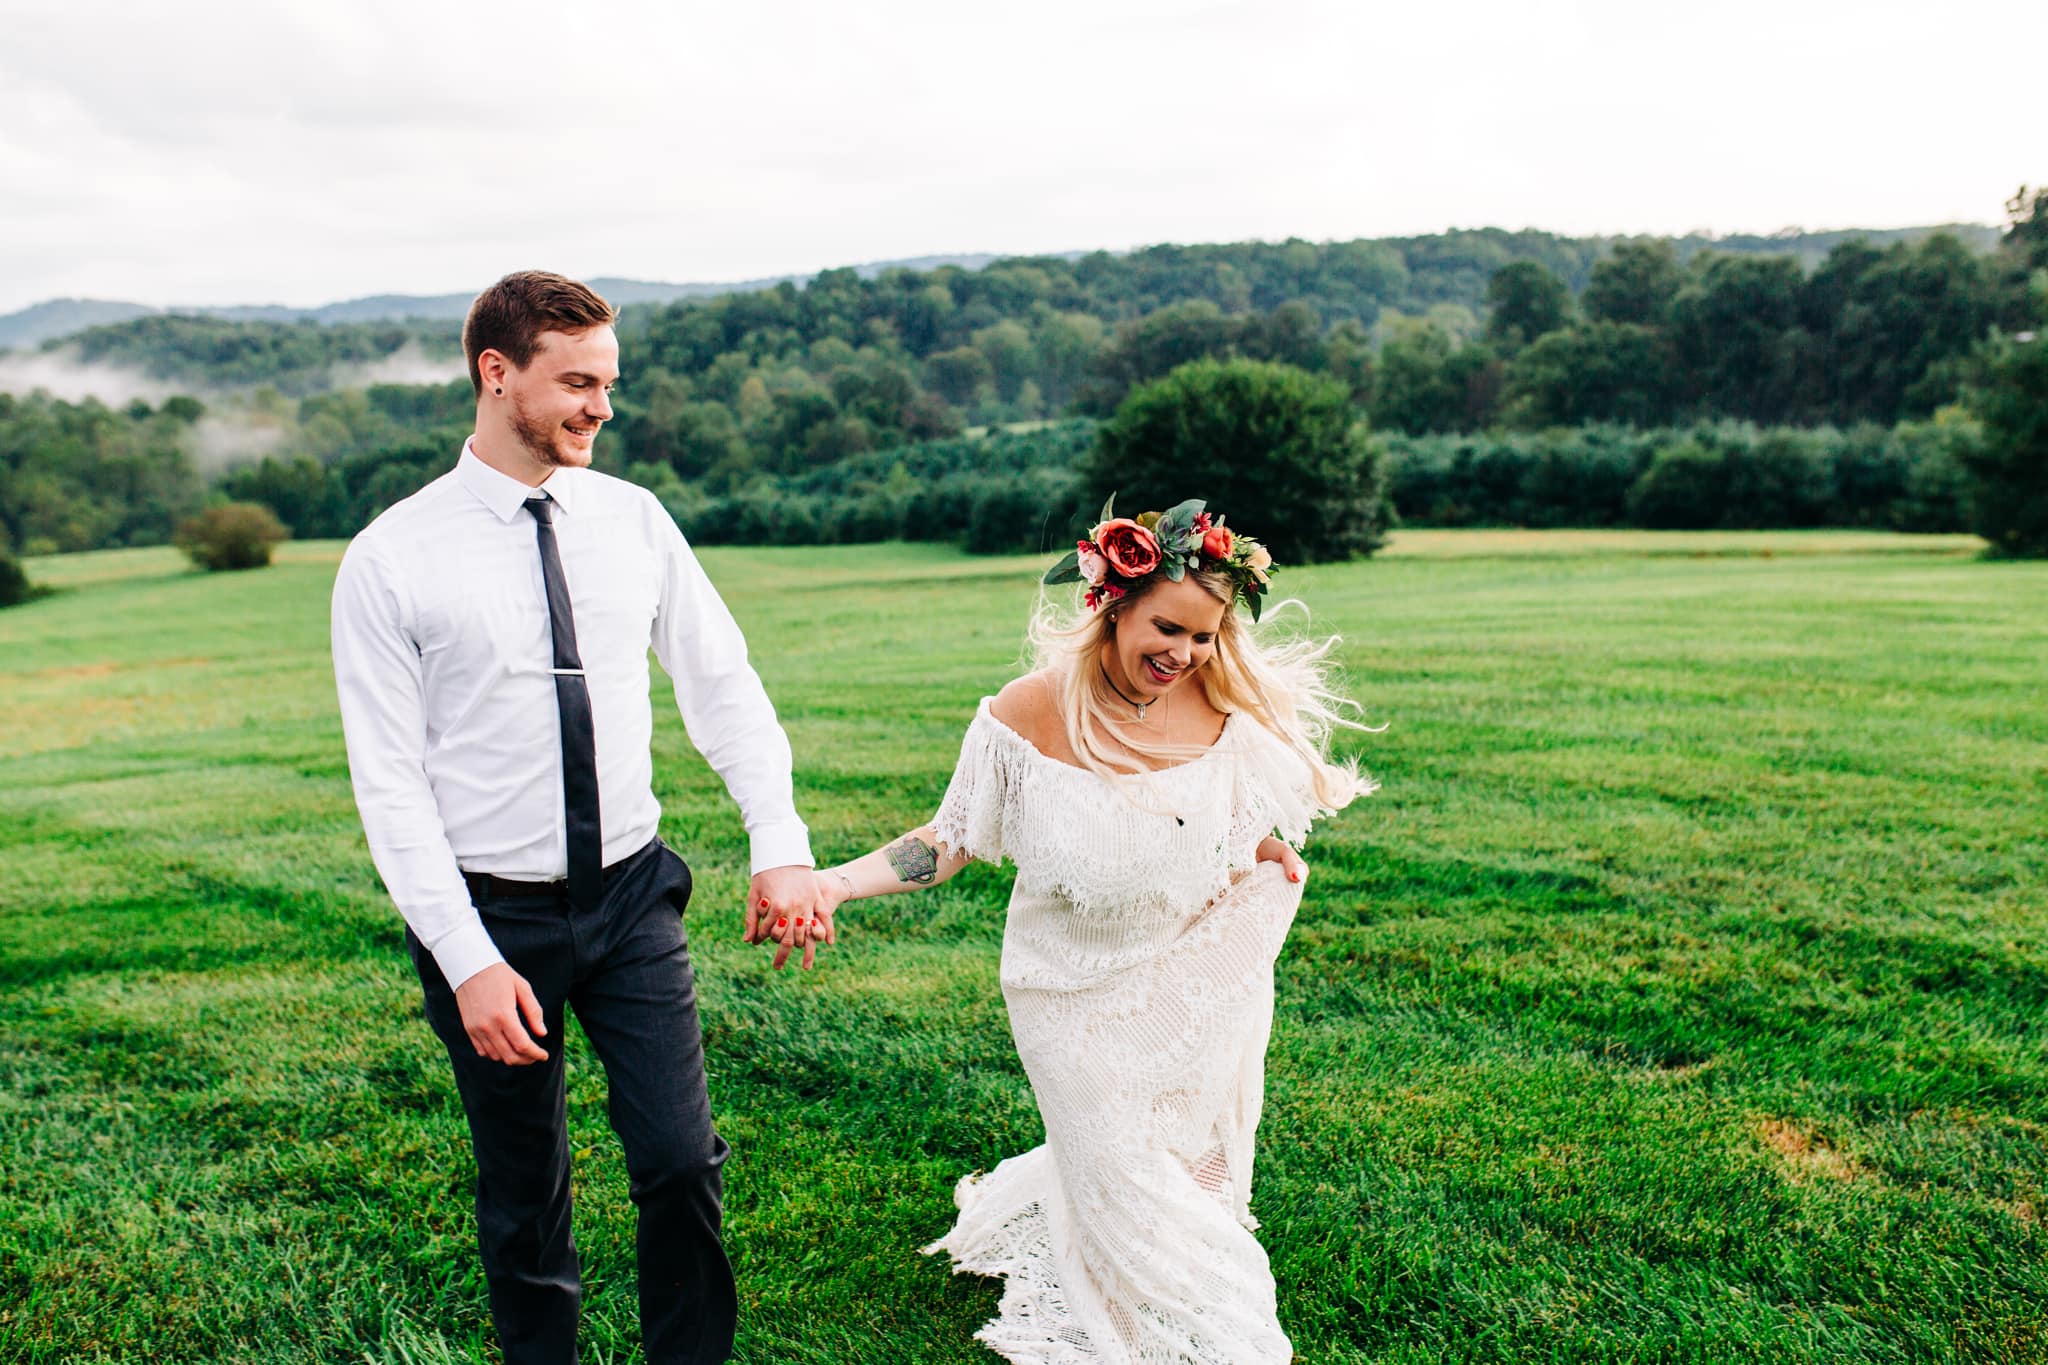 boho bride with flower crown laughing and walking with groom while holding hands along the lawn of gambill estate wedding venue in roaring river North Carolina